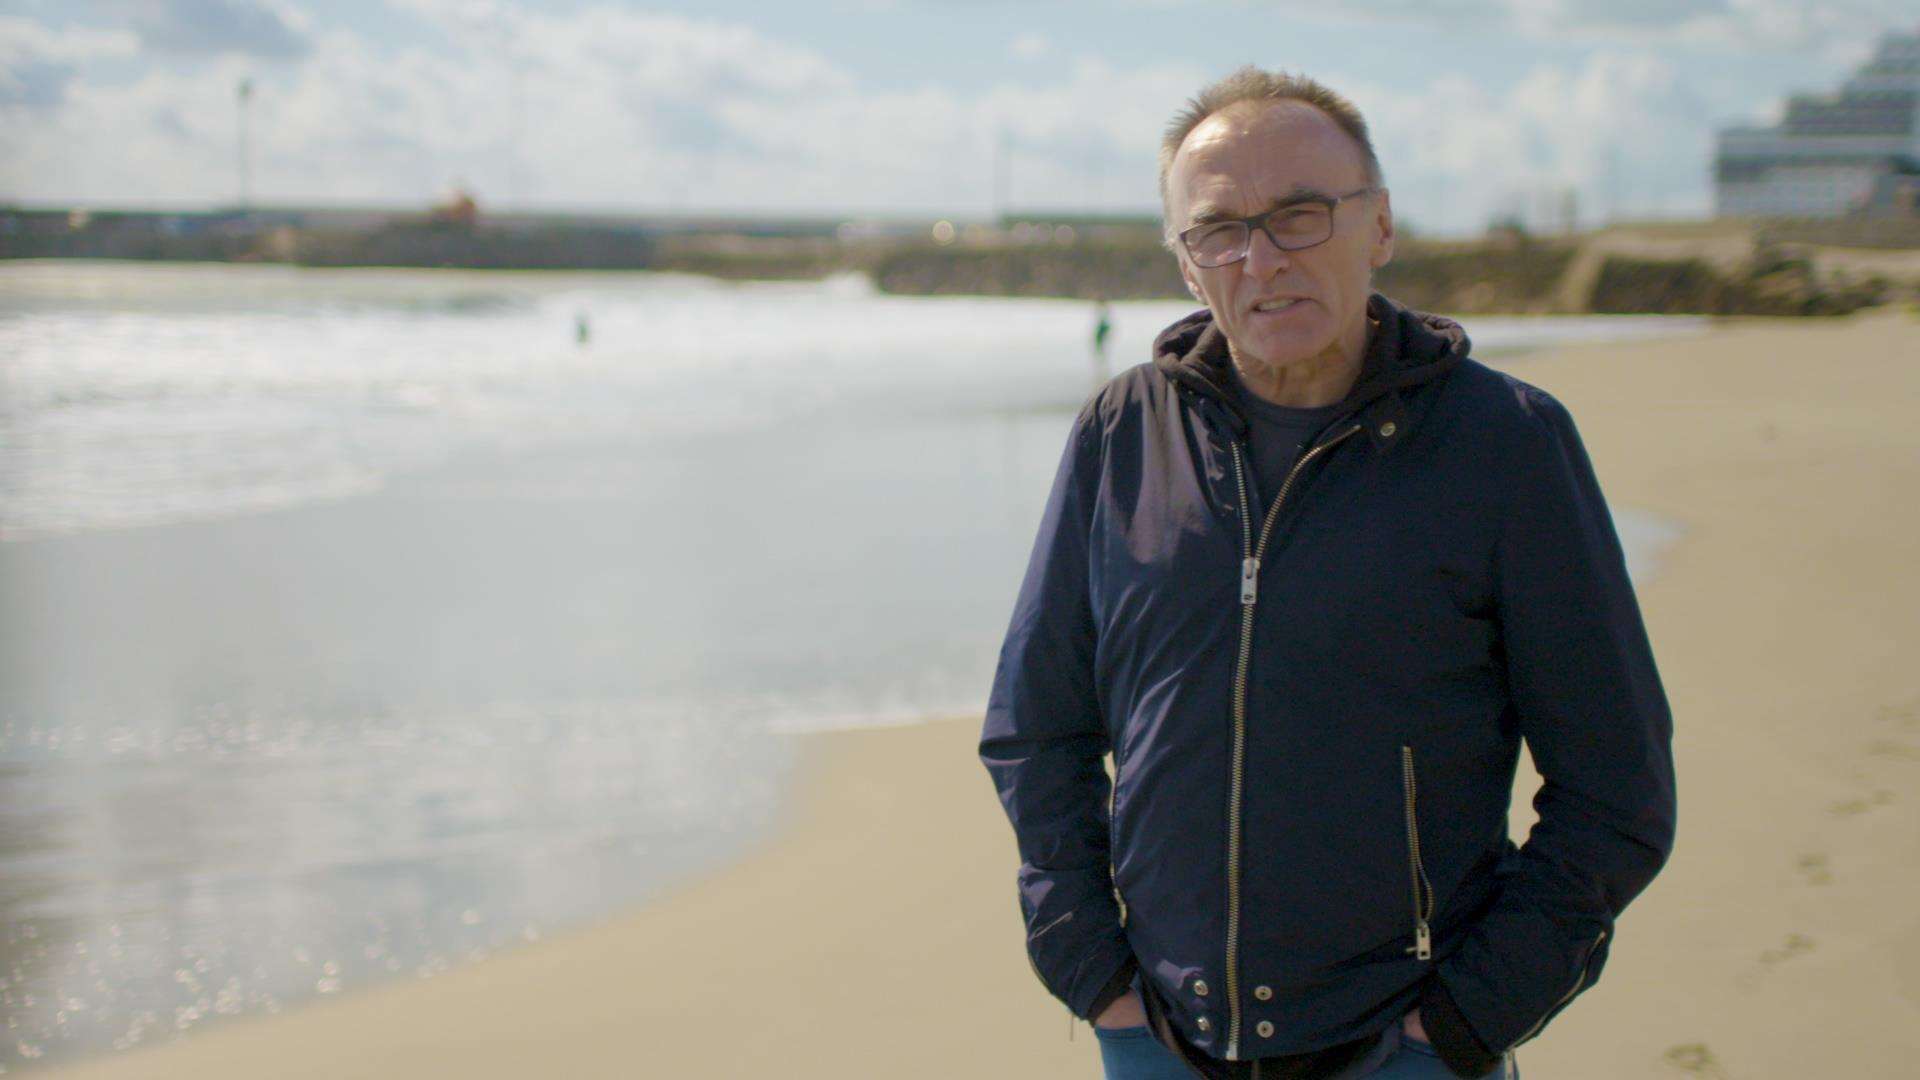 Danny Boyle in Folkestone at the beach where Sunday's event will take place.